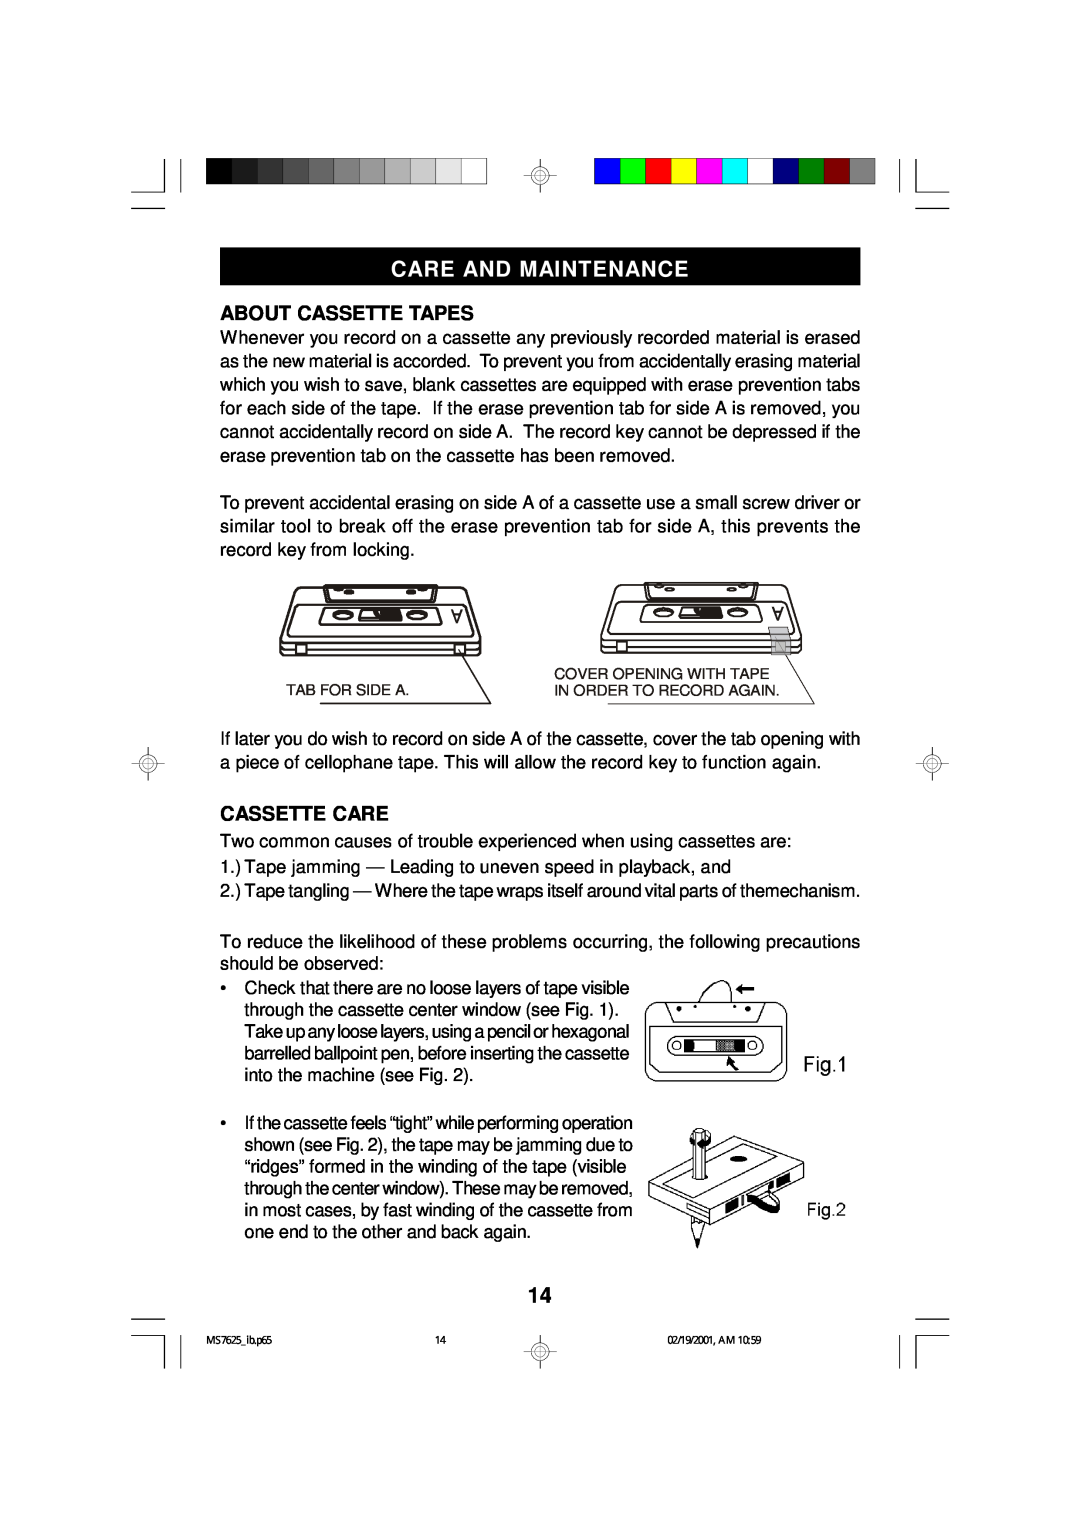 Emerson MS7625 owner manual Care And Maintenance, About Cassette Tapes, Cassette Care 